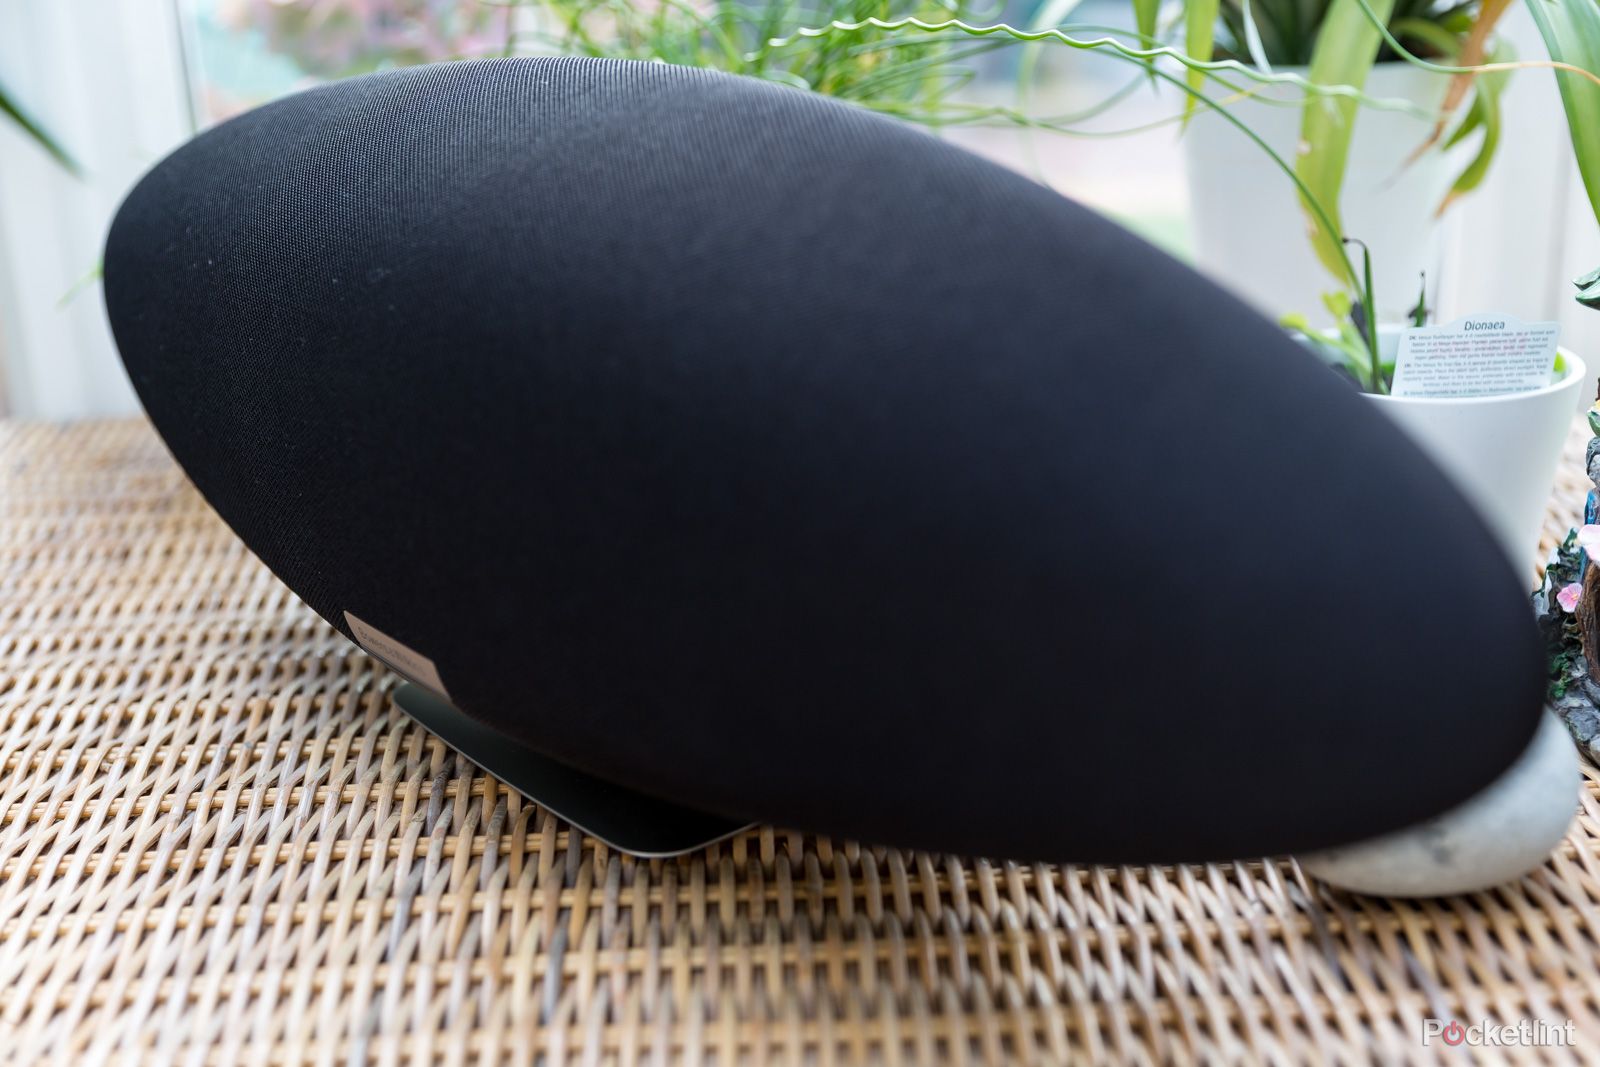 Bowers & Wilkins Zeppelin 2021 review images photo 4